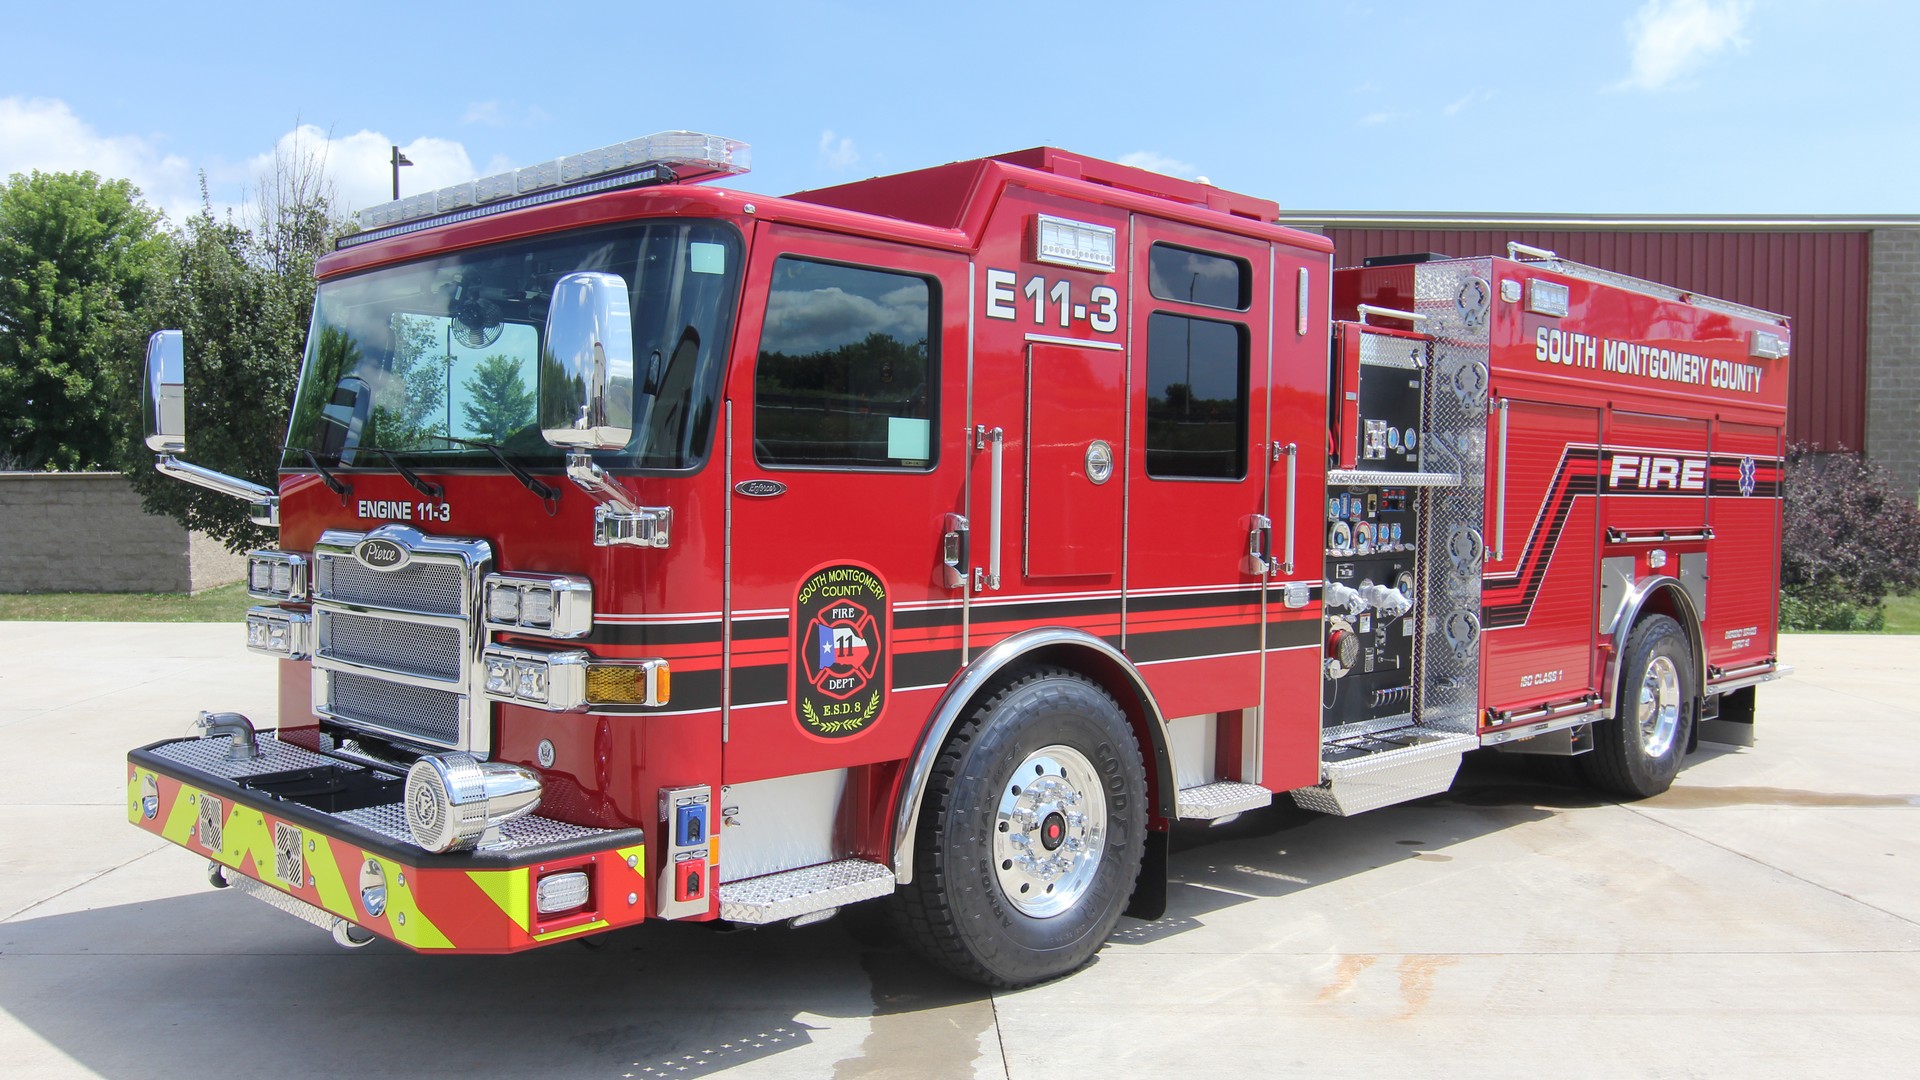 South Montgomery County TX Enforcer Pumper – 36806